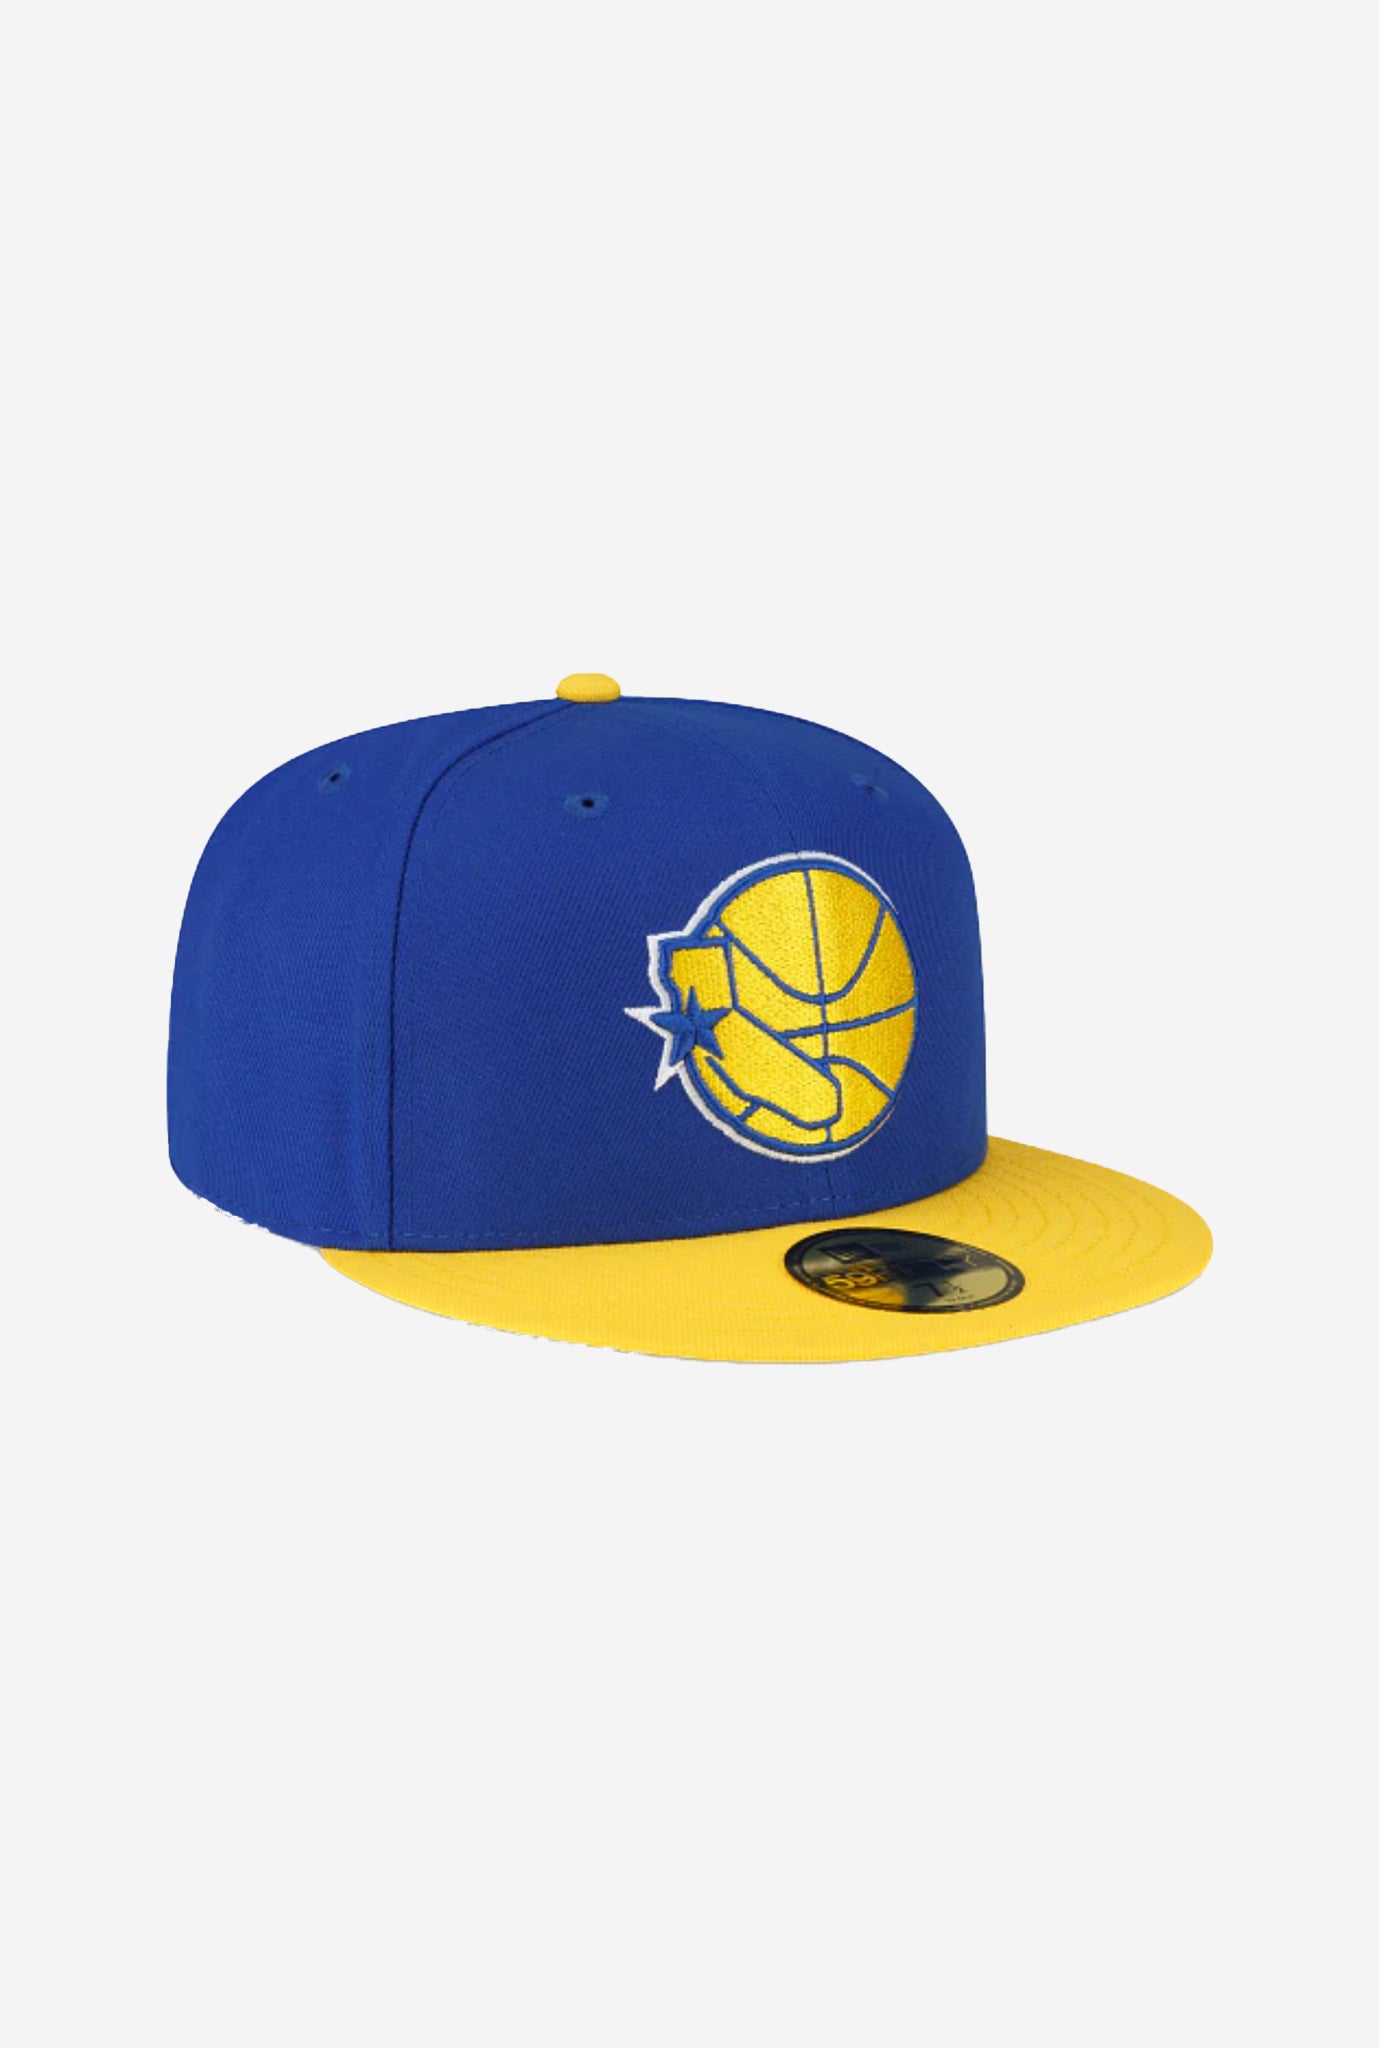 Golden State Warriors Classic Edition 9FIFTY